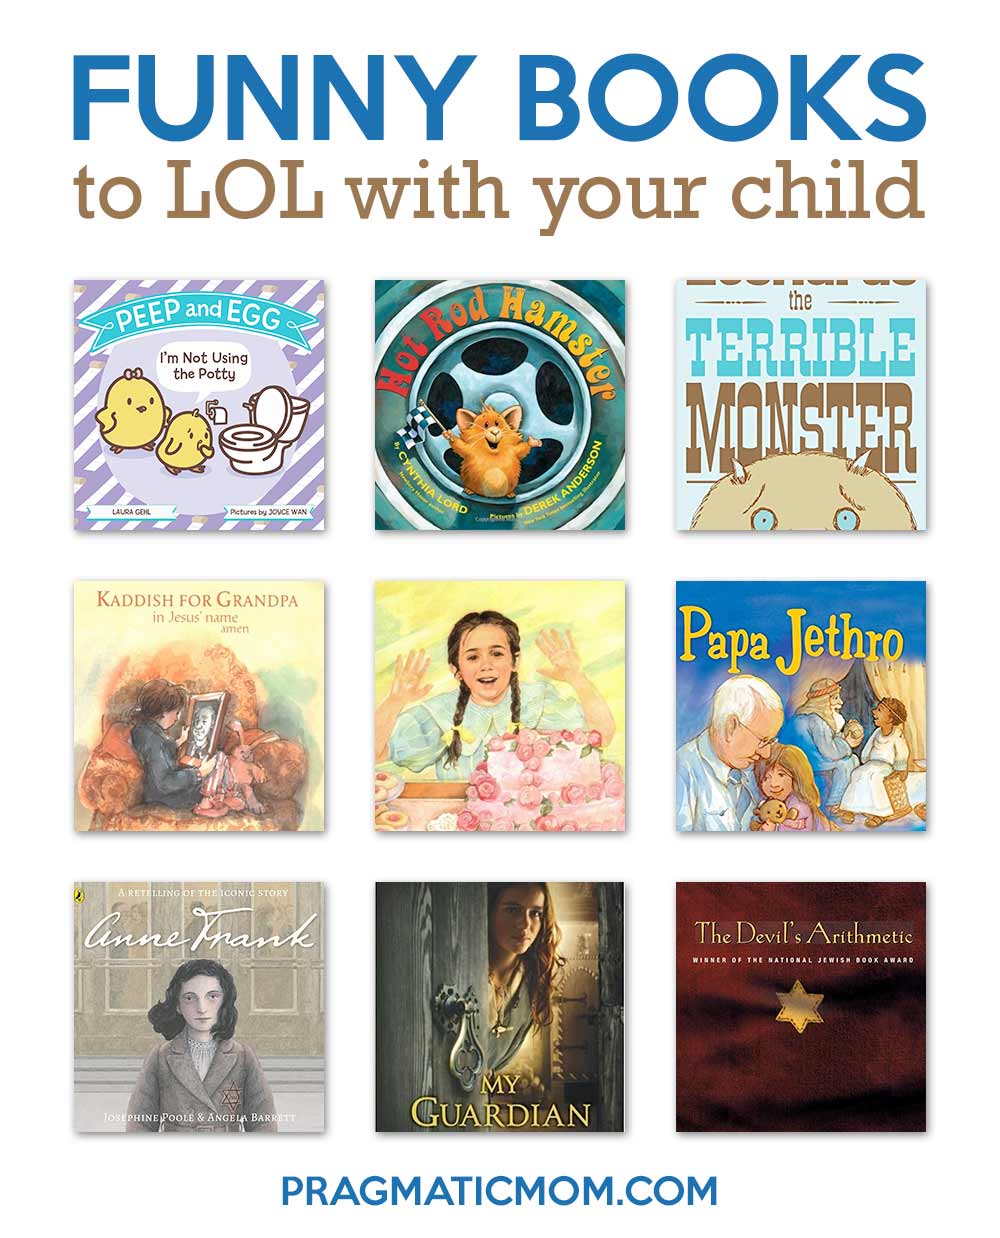 Top 10: Picture Books to LOL with Your Child